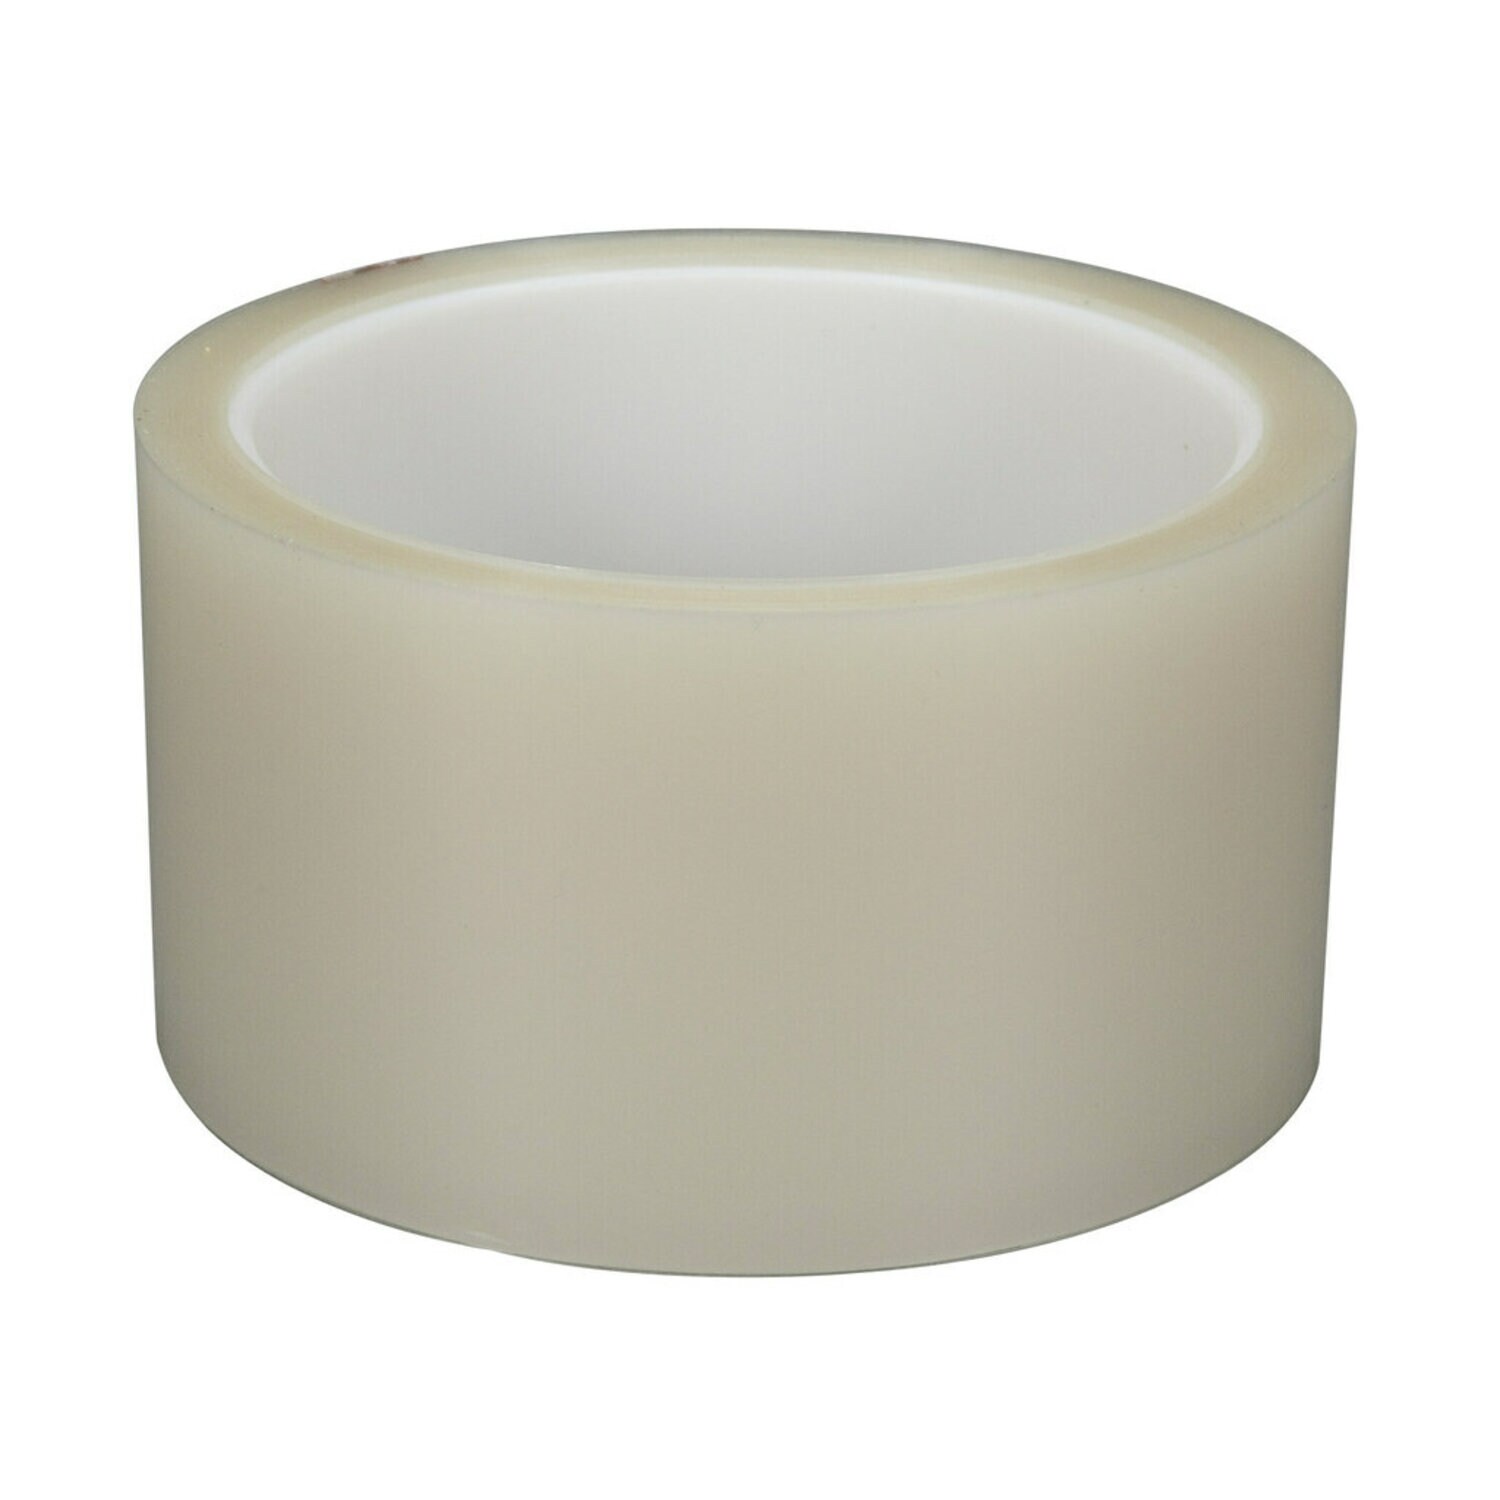 7010048693 - 3M Polyester Film Tape 853, Transparent, 48 in x 72 yd, 2.2 mil, 1
Roll/Case